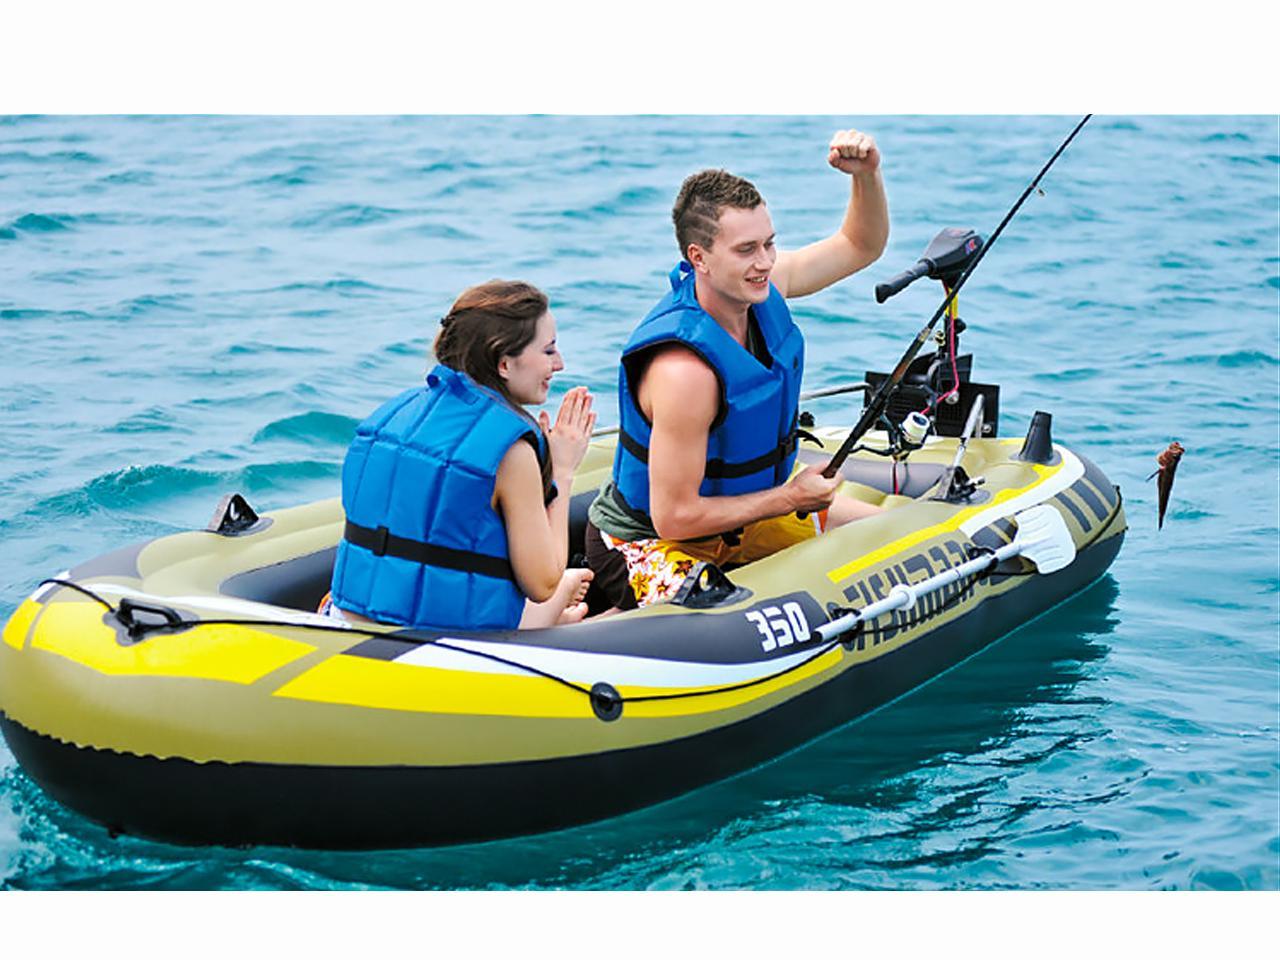 Amazon.com : MOORRLII Inflatable Kayak, 3 Person Inflatable Boat, Folding PVC  Inflatable Canoe, 200Kg Load Bearing, with 2 Paddle Mounts for Fishing,  Diving, Standard : Sports & Outdoors